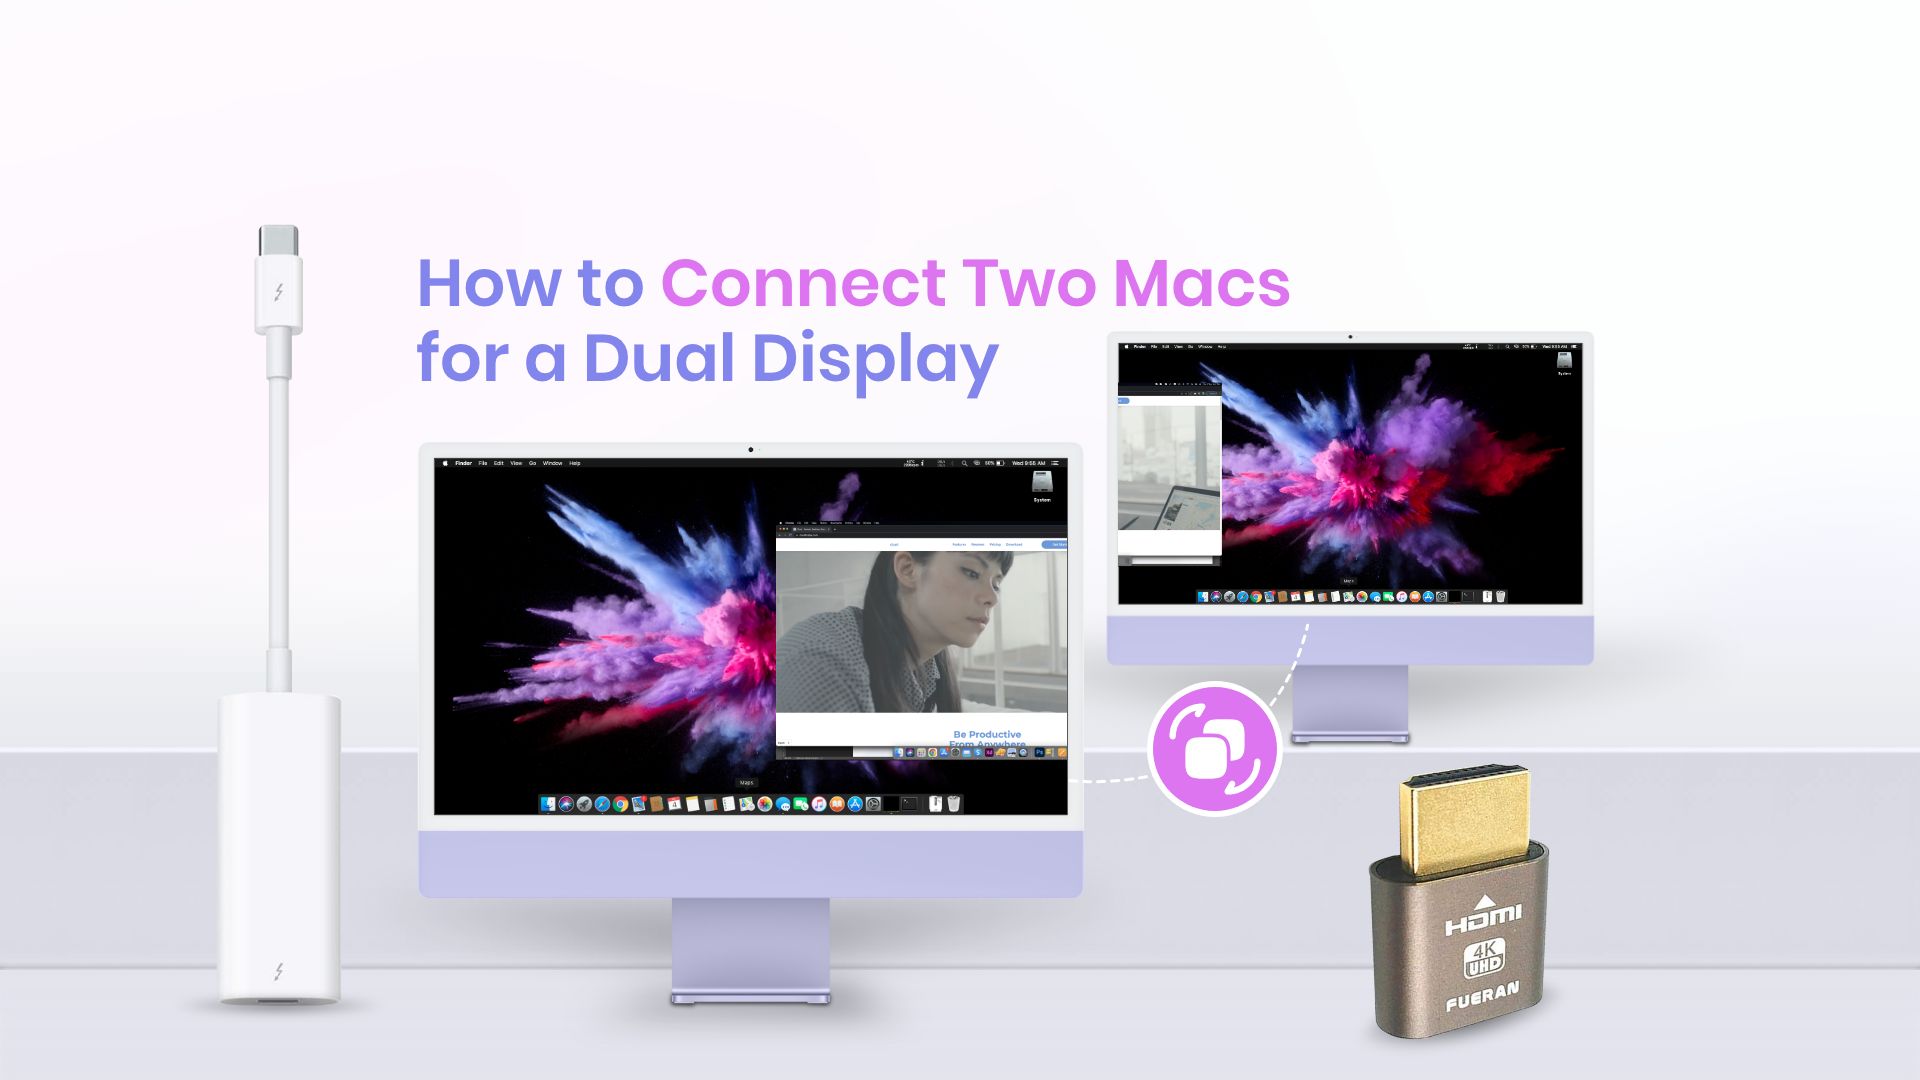 How to Connect Two Macs for a Dual Display